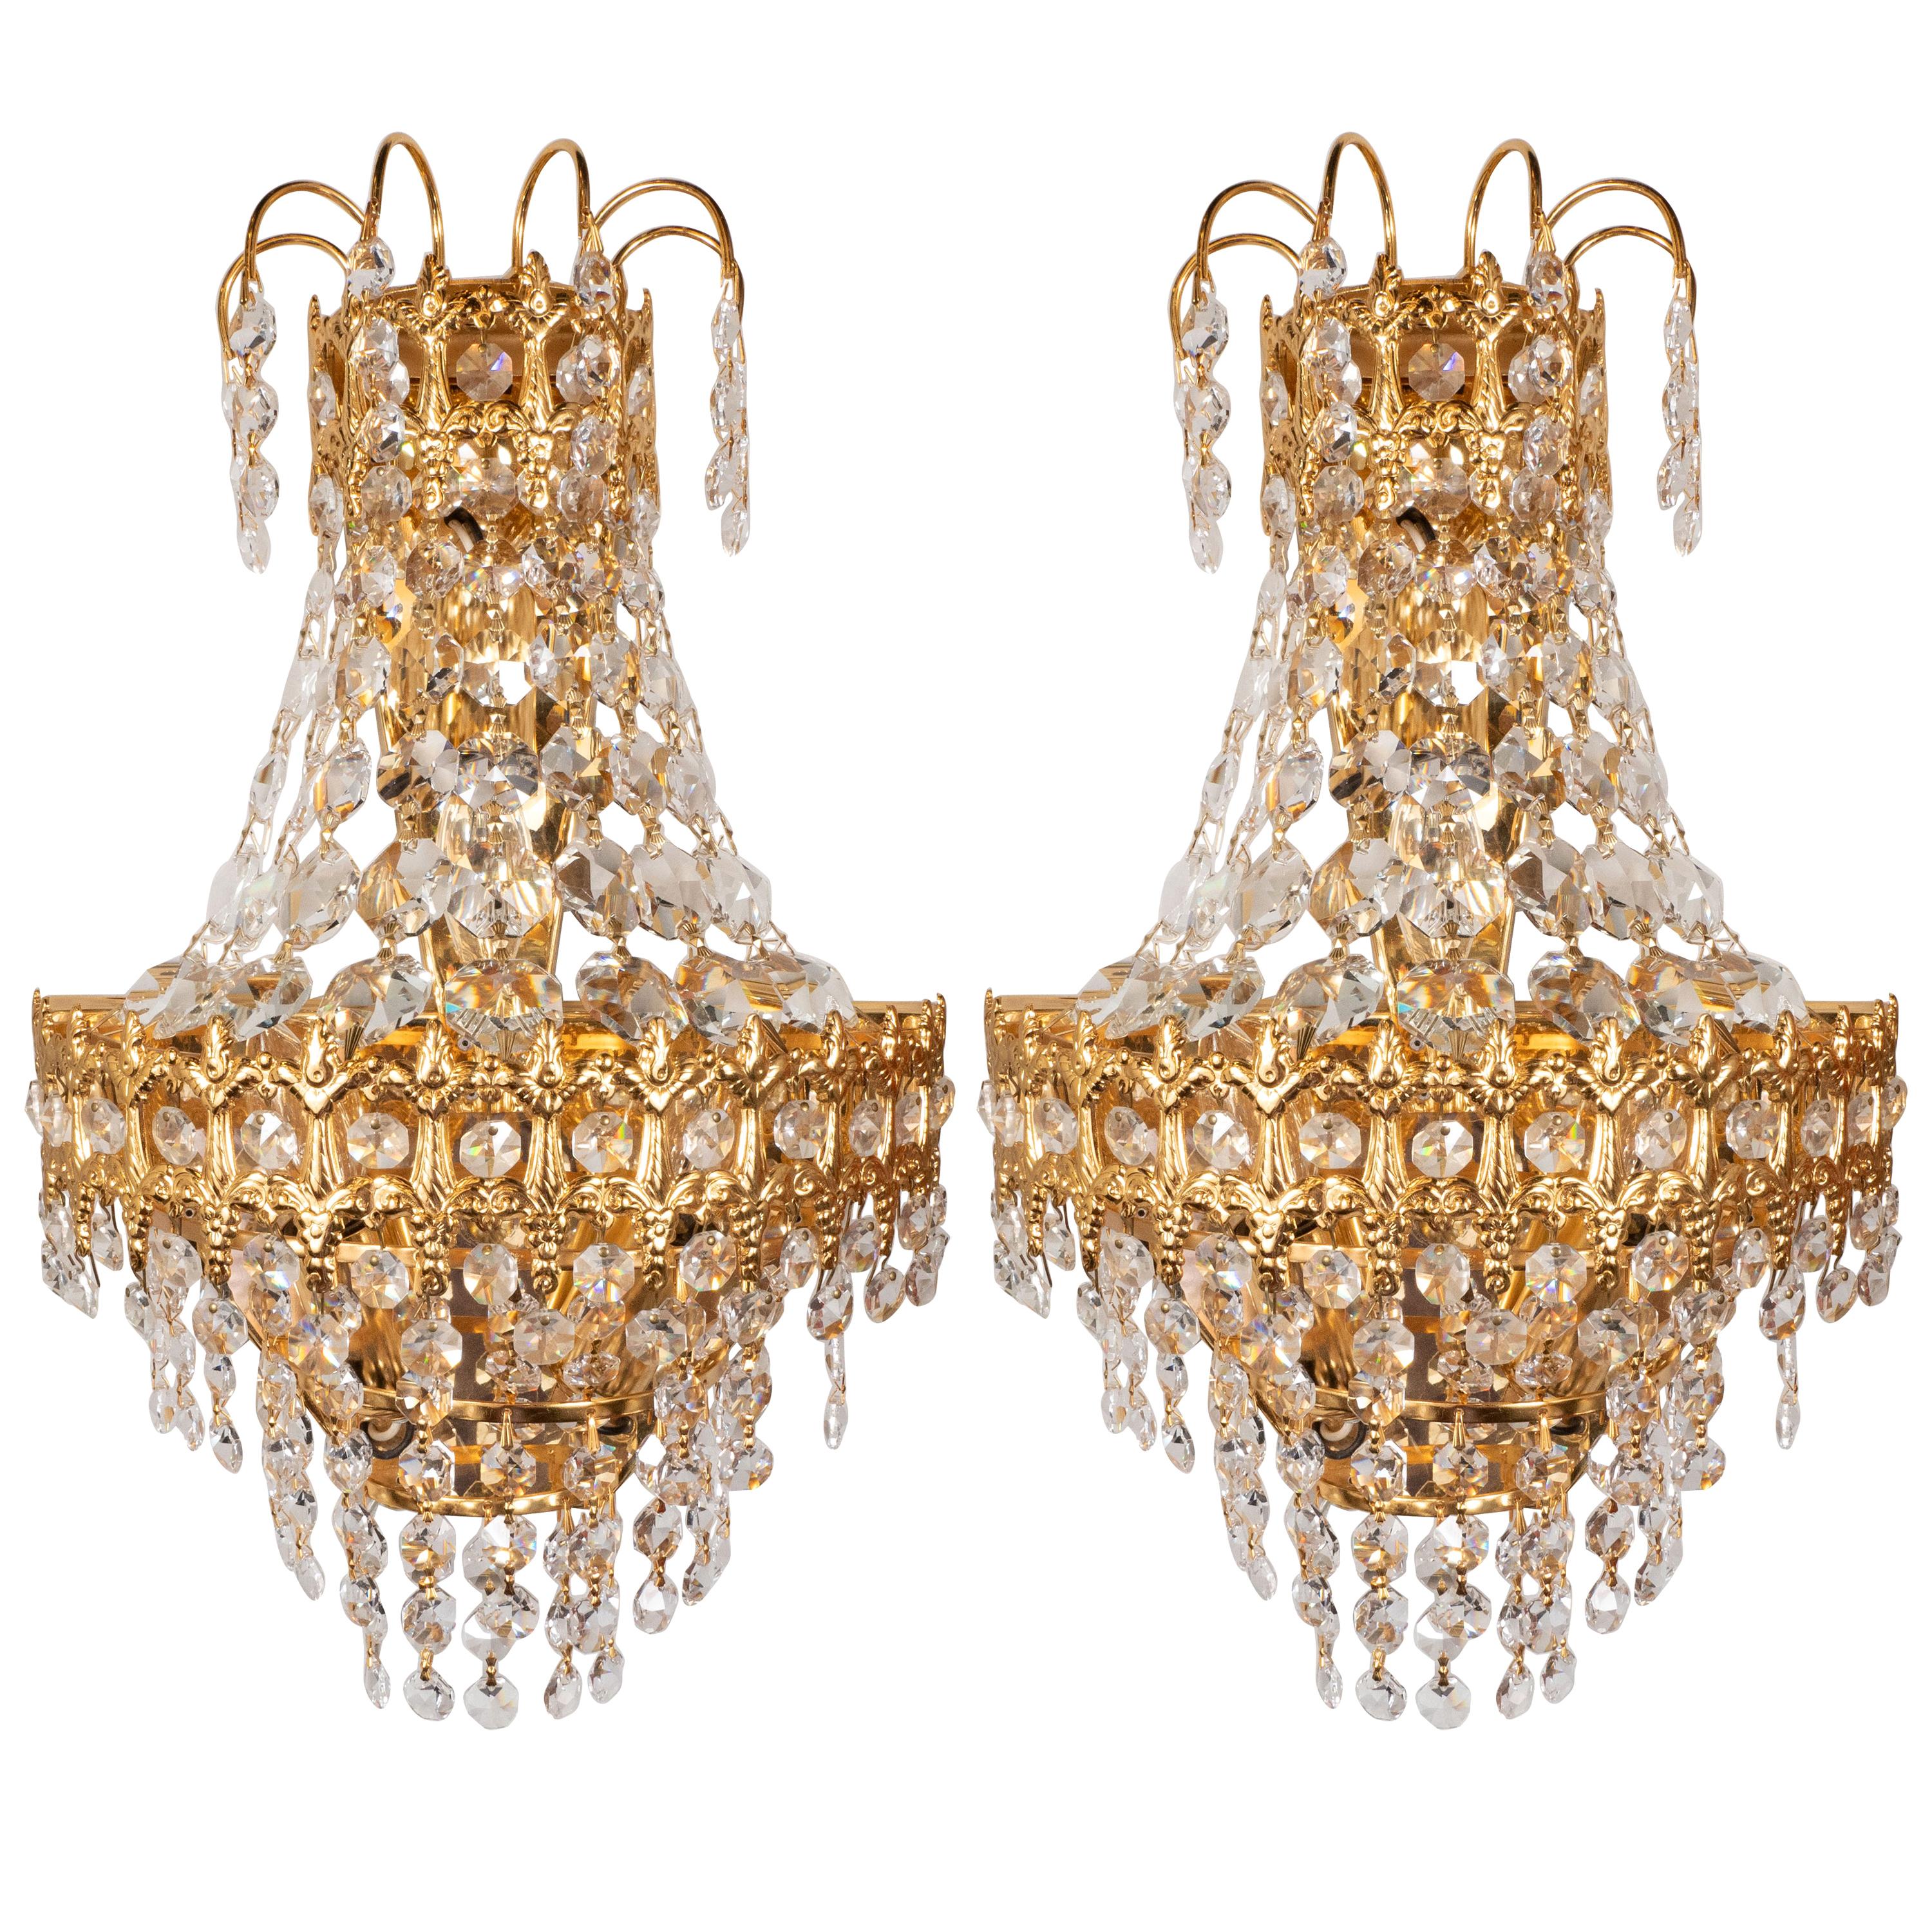 Hollywood Regency Faceted Crystal Teardrop Sconces with Gold-Plated Fittings